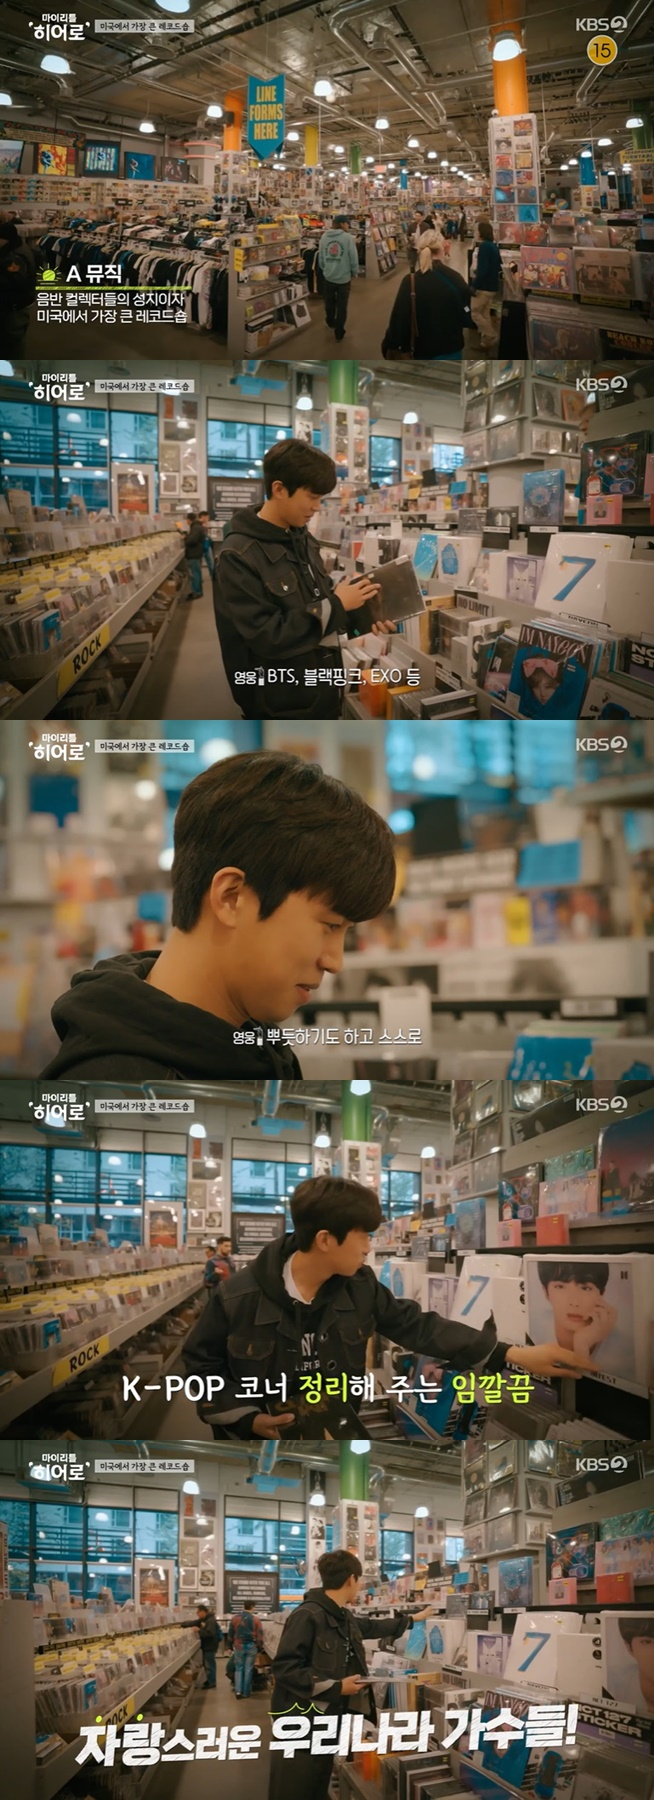 In KBS 2TV My Little Hero (hereinafter referred to as Marich), which was broadcasted on the 10th, Lim Young-woong spent his leisure time in Los Angeles after completing his first overseas concert IM HERO - in Los Angeles at Dolby Theater.Lim Young-woong stopped by a Souvenir shop near the performance venue.He bought the Magnet that Jasin collects and then bought Best Mother, Best Grandma and Best hero Oscar Trophy Souvenir for Mom and Grandmas Boy.Lim Young-woong also went to the largest and longest-running amoeba Records shop in the U.S., where Lim Young-woong saw Jasins album in the K-pop segment and asked, Do you have my album?There were so many BTS, BLACKPINK, EXO, etc. I was proud to have my own album, and I thought I could try a more global top model, he said.